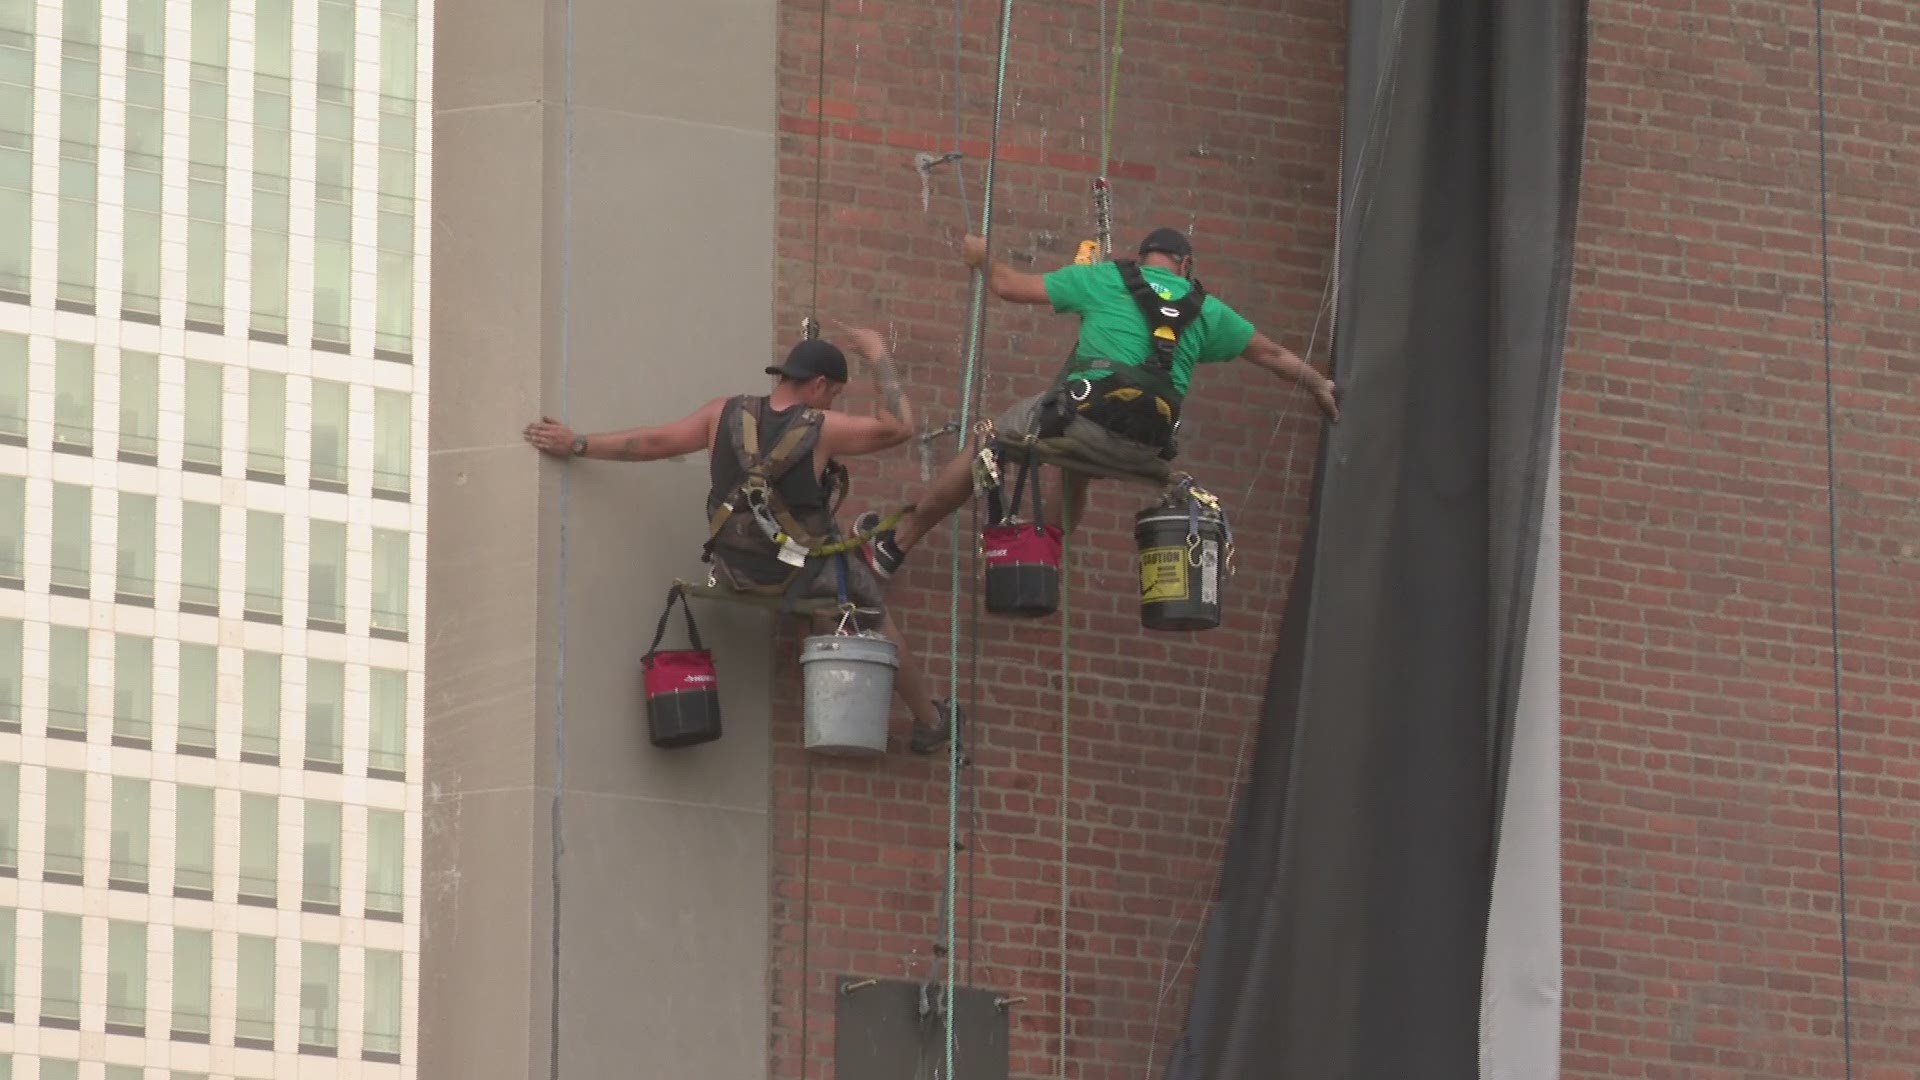 Final piece of LeBron James banner removed from Sherwin-Williams building